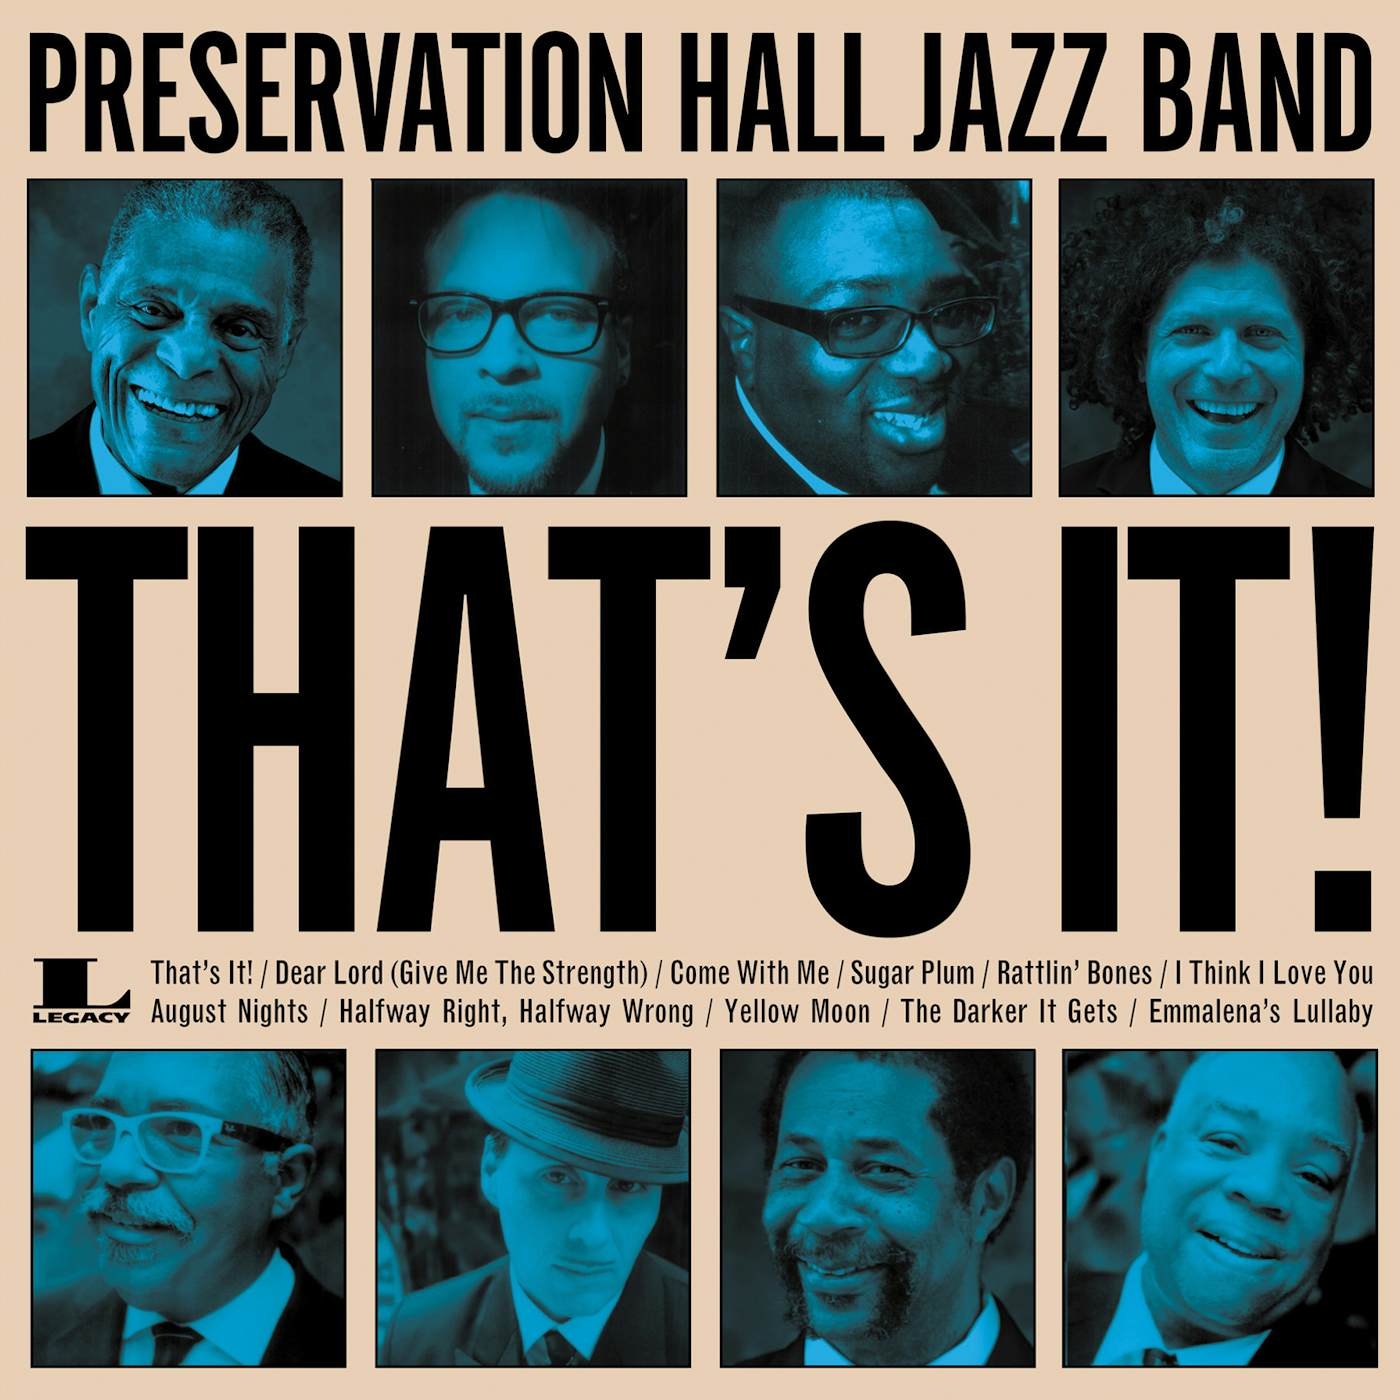 Preservation Hall Jazz Band THAT'S IT Vinyl Record